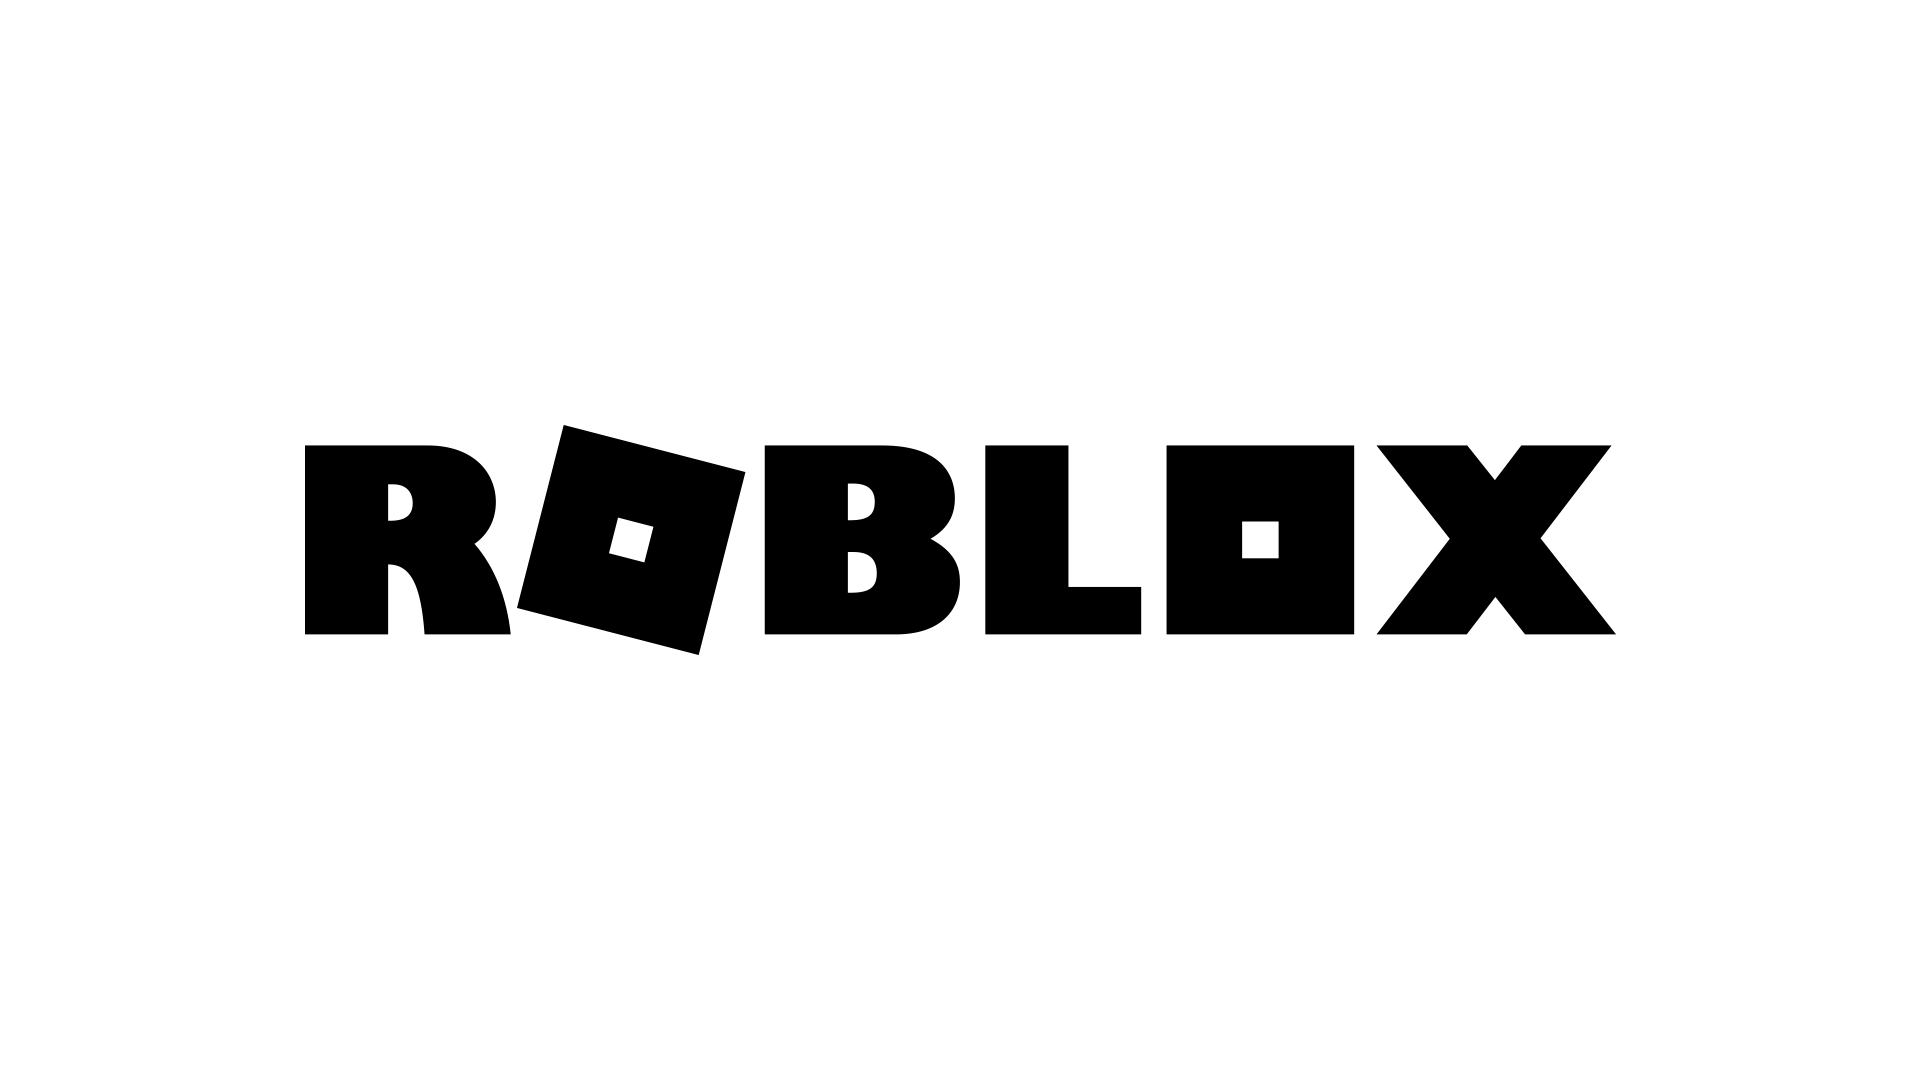 The 7th Annual Bloxy Awards Brings 4 Million Concurrent Players